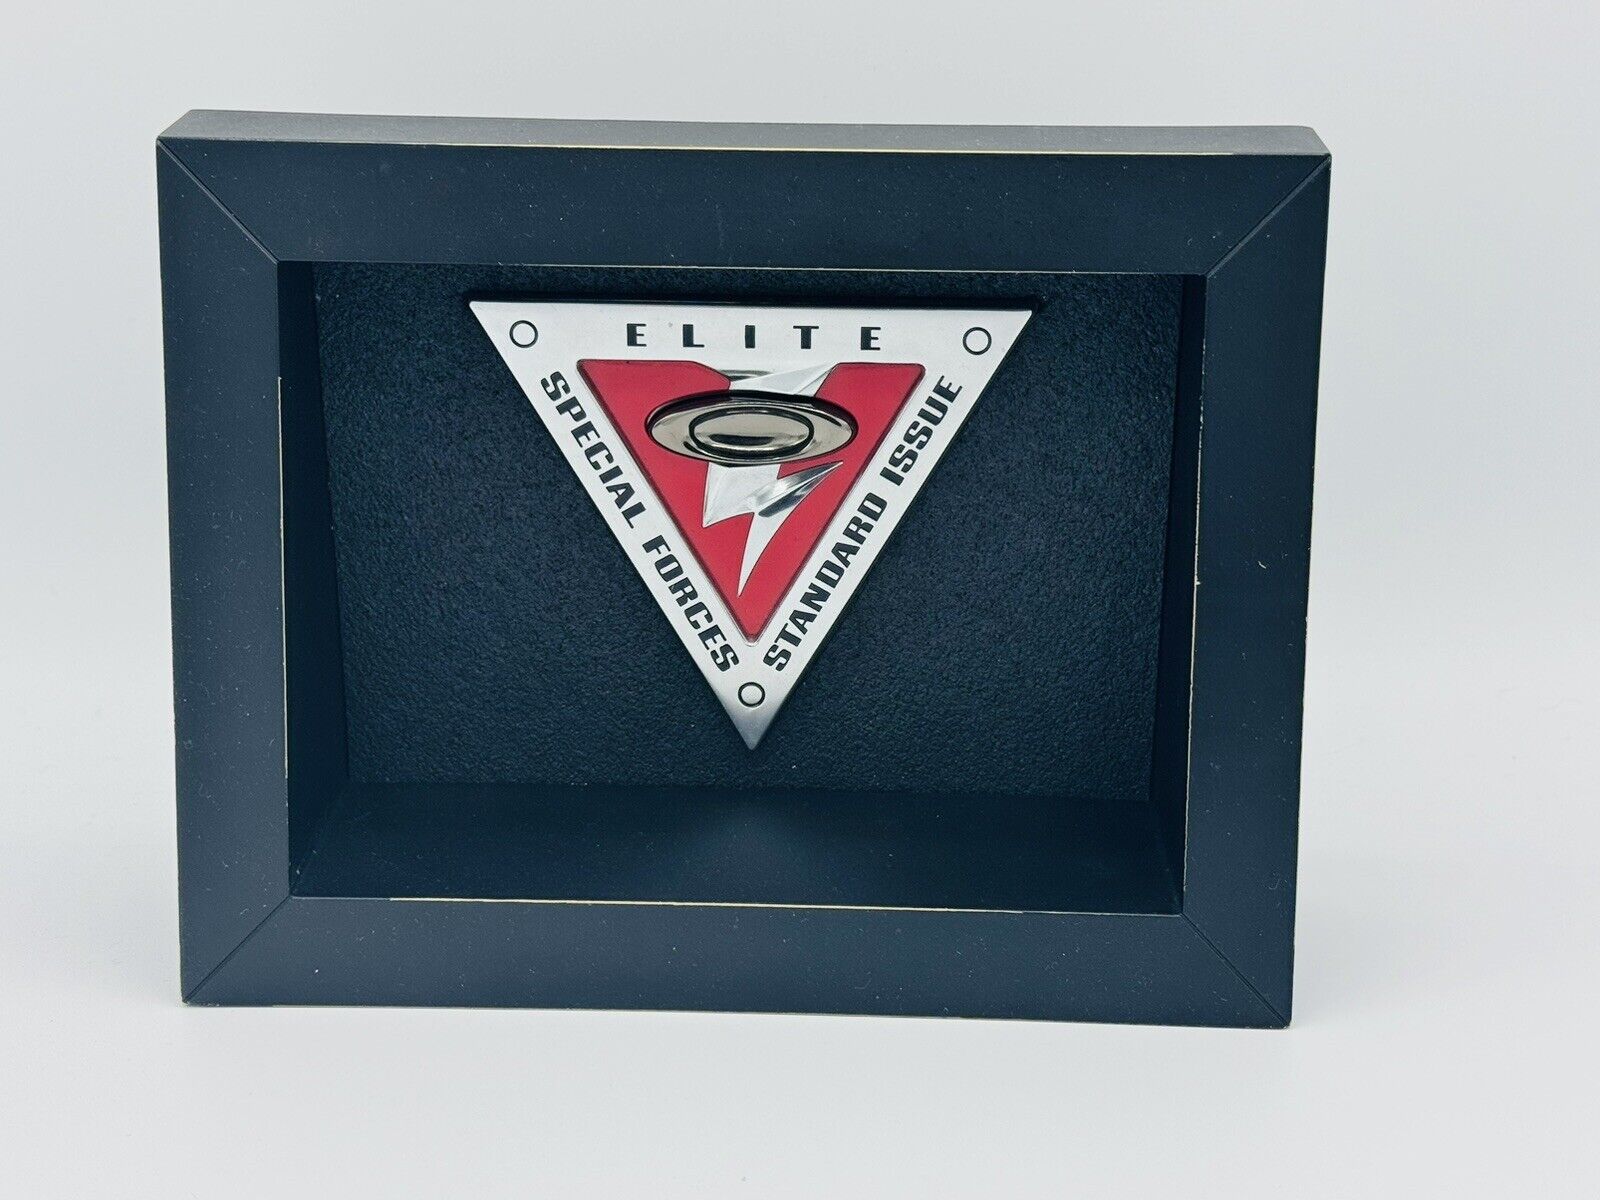 NEW LARGE OAKLEY MILITARY MEDAL STANDARD ISSUE ELITE PLAQUE TRIANGLE FRAMED RARE